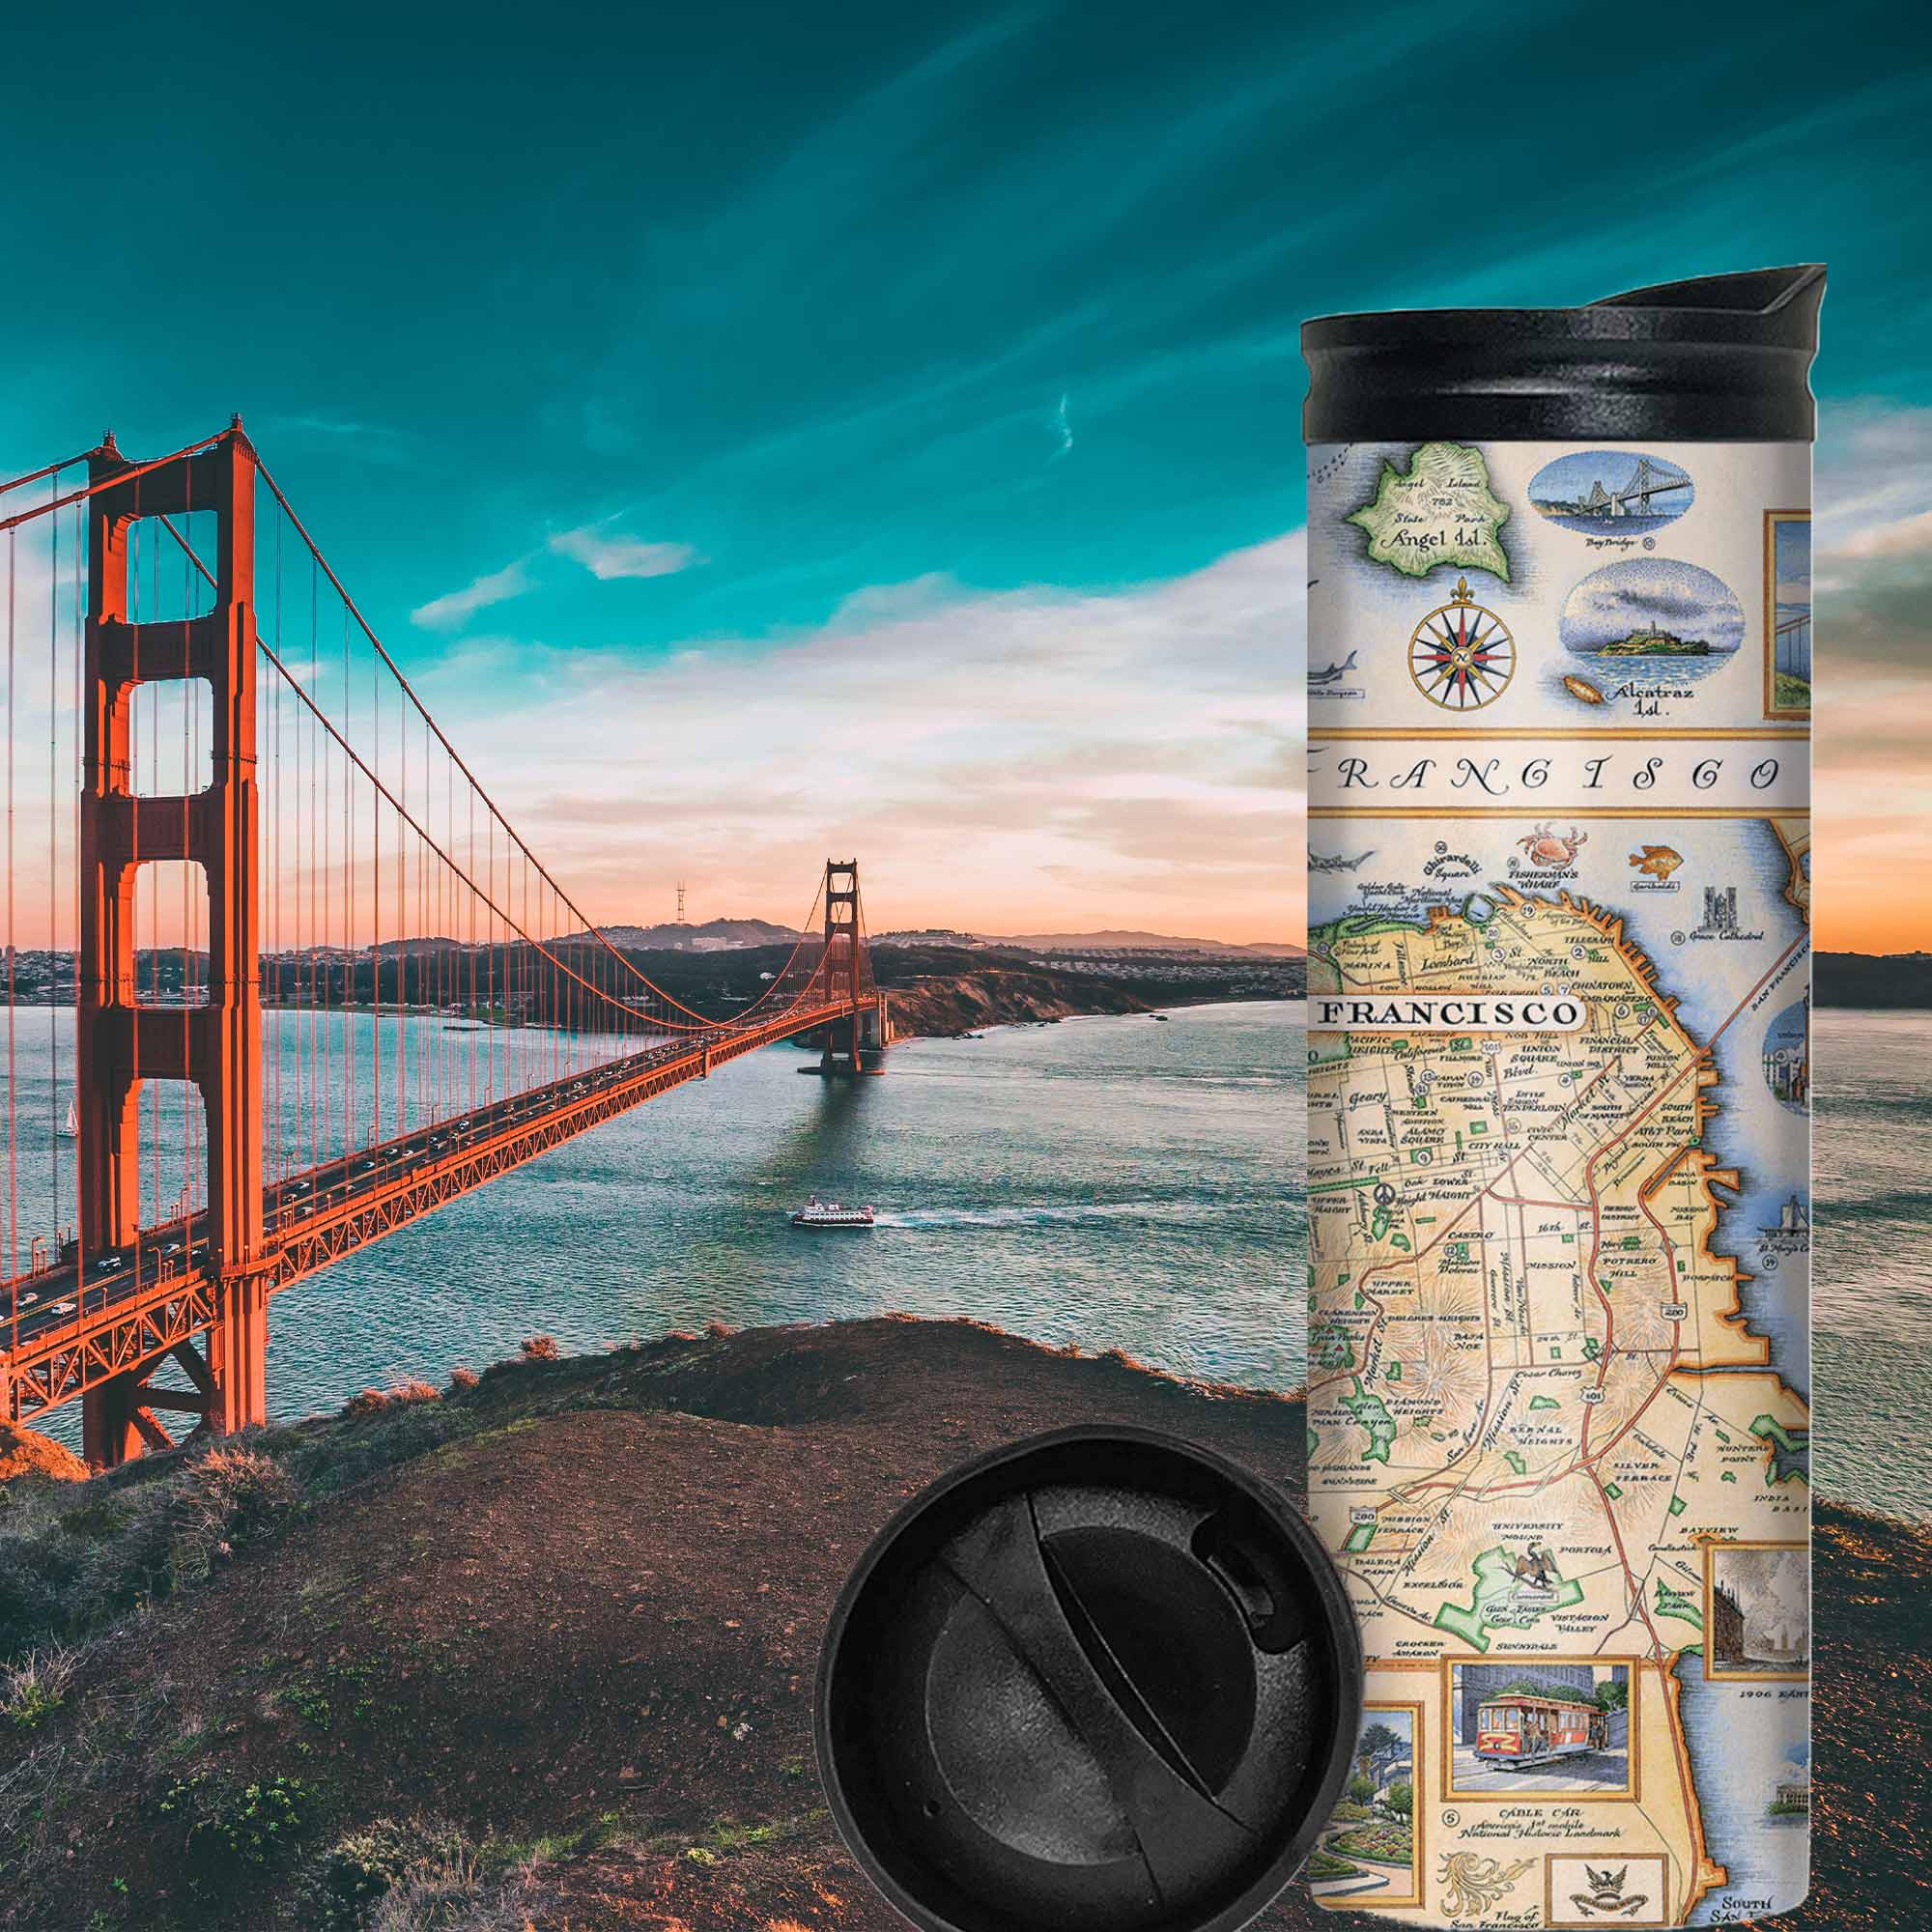 San Francisco Bay Map 16 oz Travel thermos mug with Golden Gate Bridge in the background.  The map features illustrations of places such as Candlestick Park, Fisherman's Wharf, Transamerica Pyramid, and Alcatraz Island. Flora and fauna include octopus, crab, palm trees, and a dahlia. 